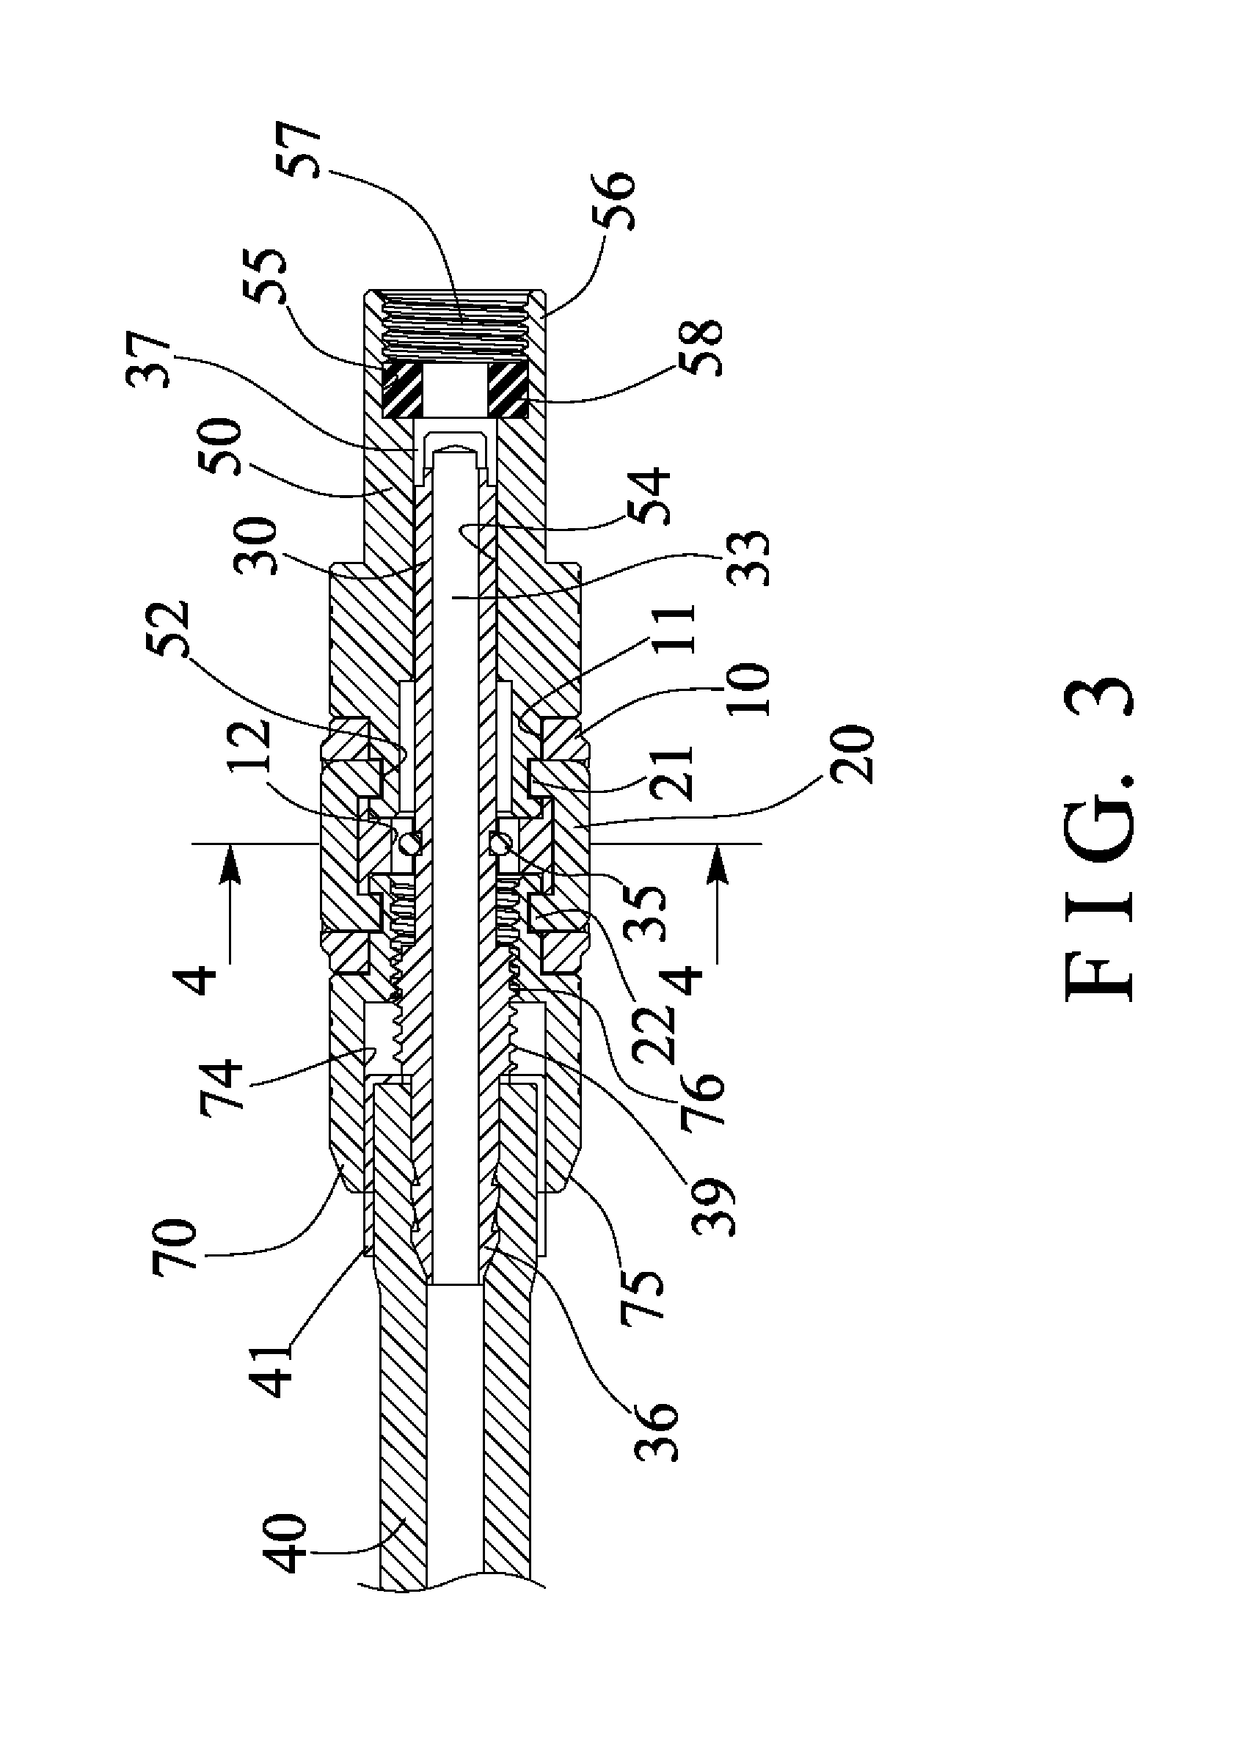 Air valve connecting device